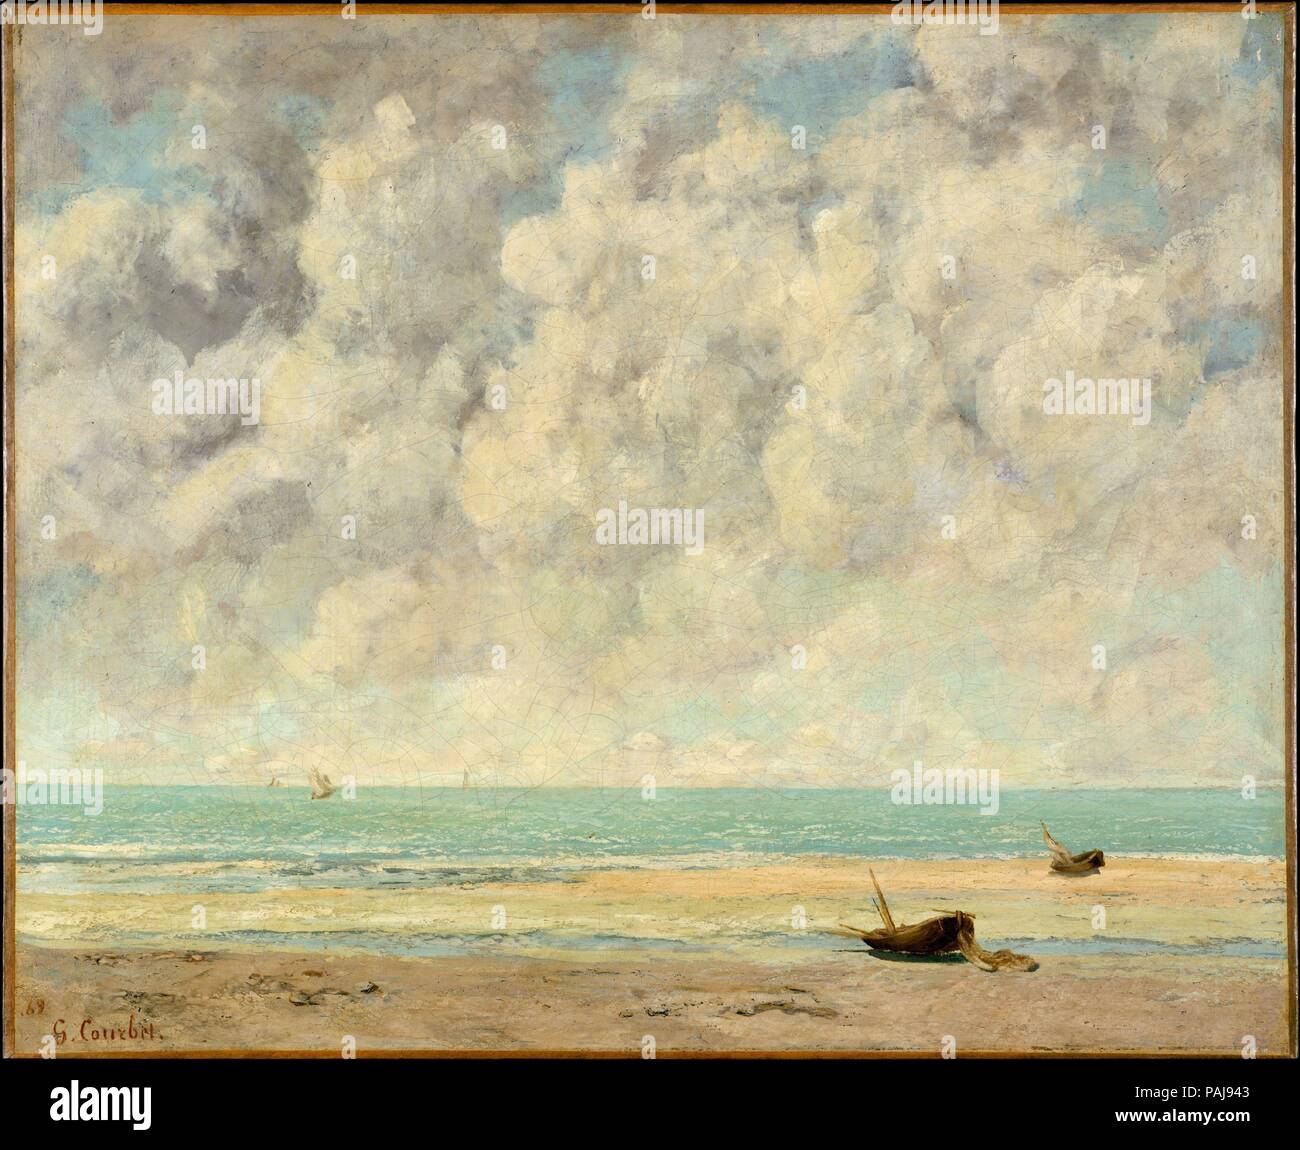 The Calm Sea. Artist: Gustave Courbet (French, Ornans 1819-1877 La Tour-de-Peilz). Dimensions: 23 1/2 x 28 3/4 in. (59.7 x 73 cm). Date: 1869.  Courbet painted this view looking out over the English Channel during a visit to Étretat along the coast of Normandy in August 1869. The ocean has receded at low tide, and two small boats are left on the shore. The tranquil composition, with its immense sky towering over narrow bands of water and sand, is unusual for Courbet's marine paintings of this period, dominated by dramatically crashing waves. Museum: Metropolitan Museum of Art, New York, USA. Stock Photo